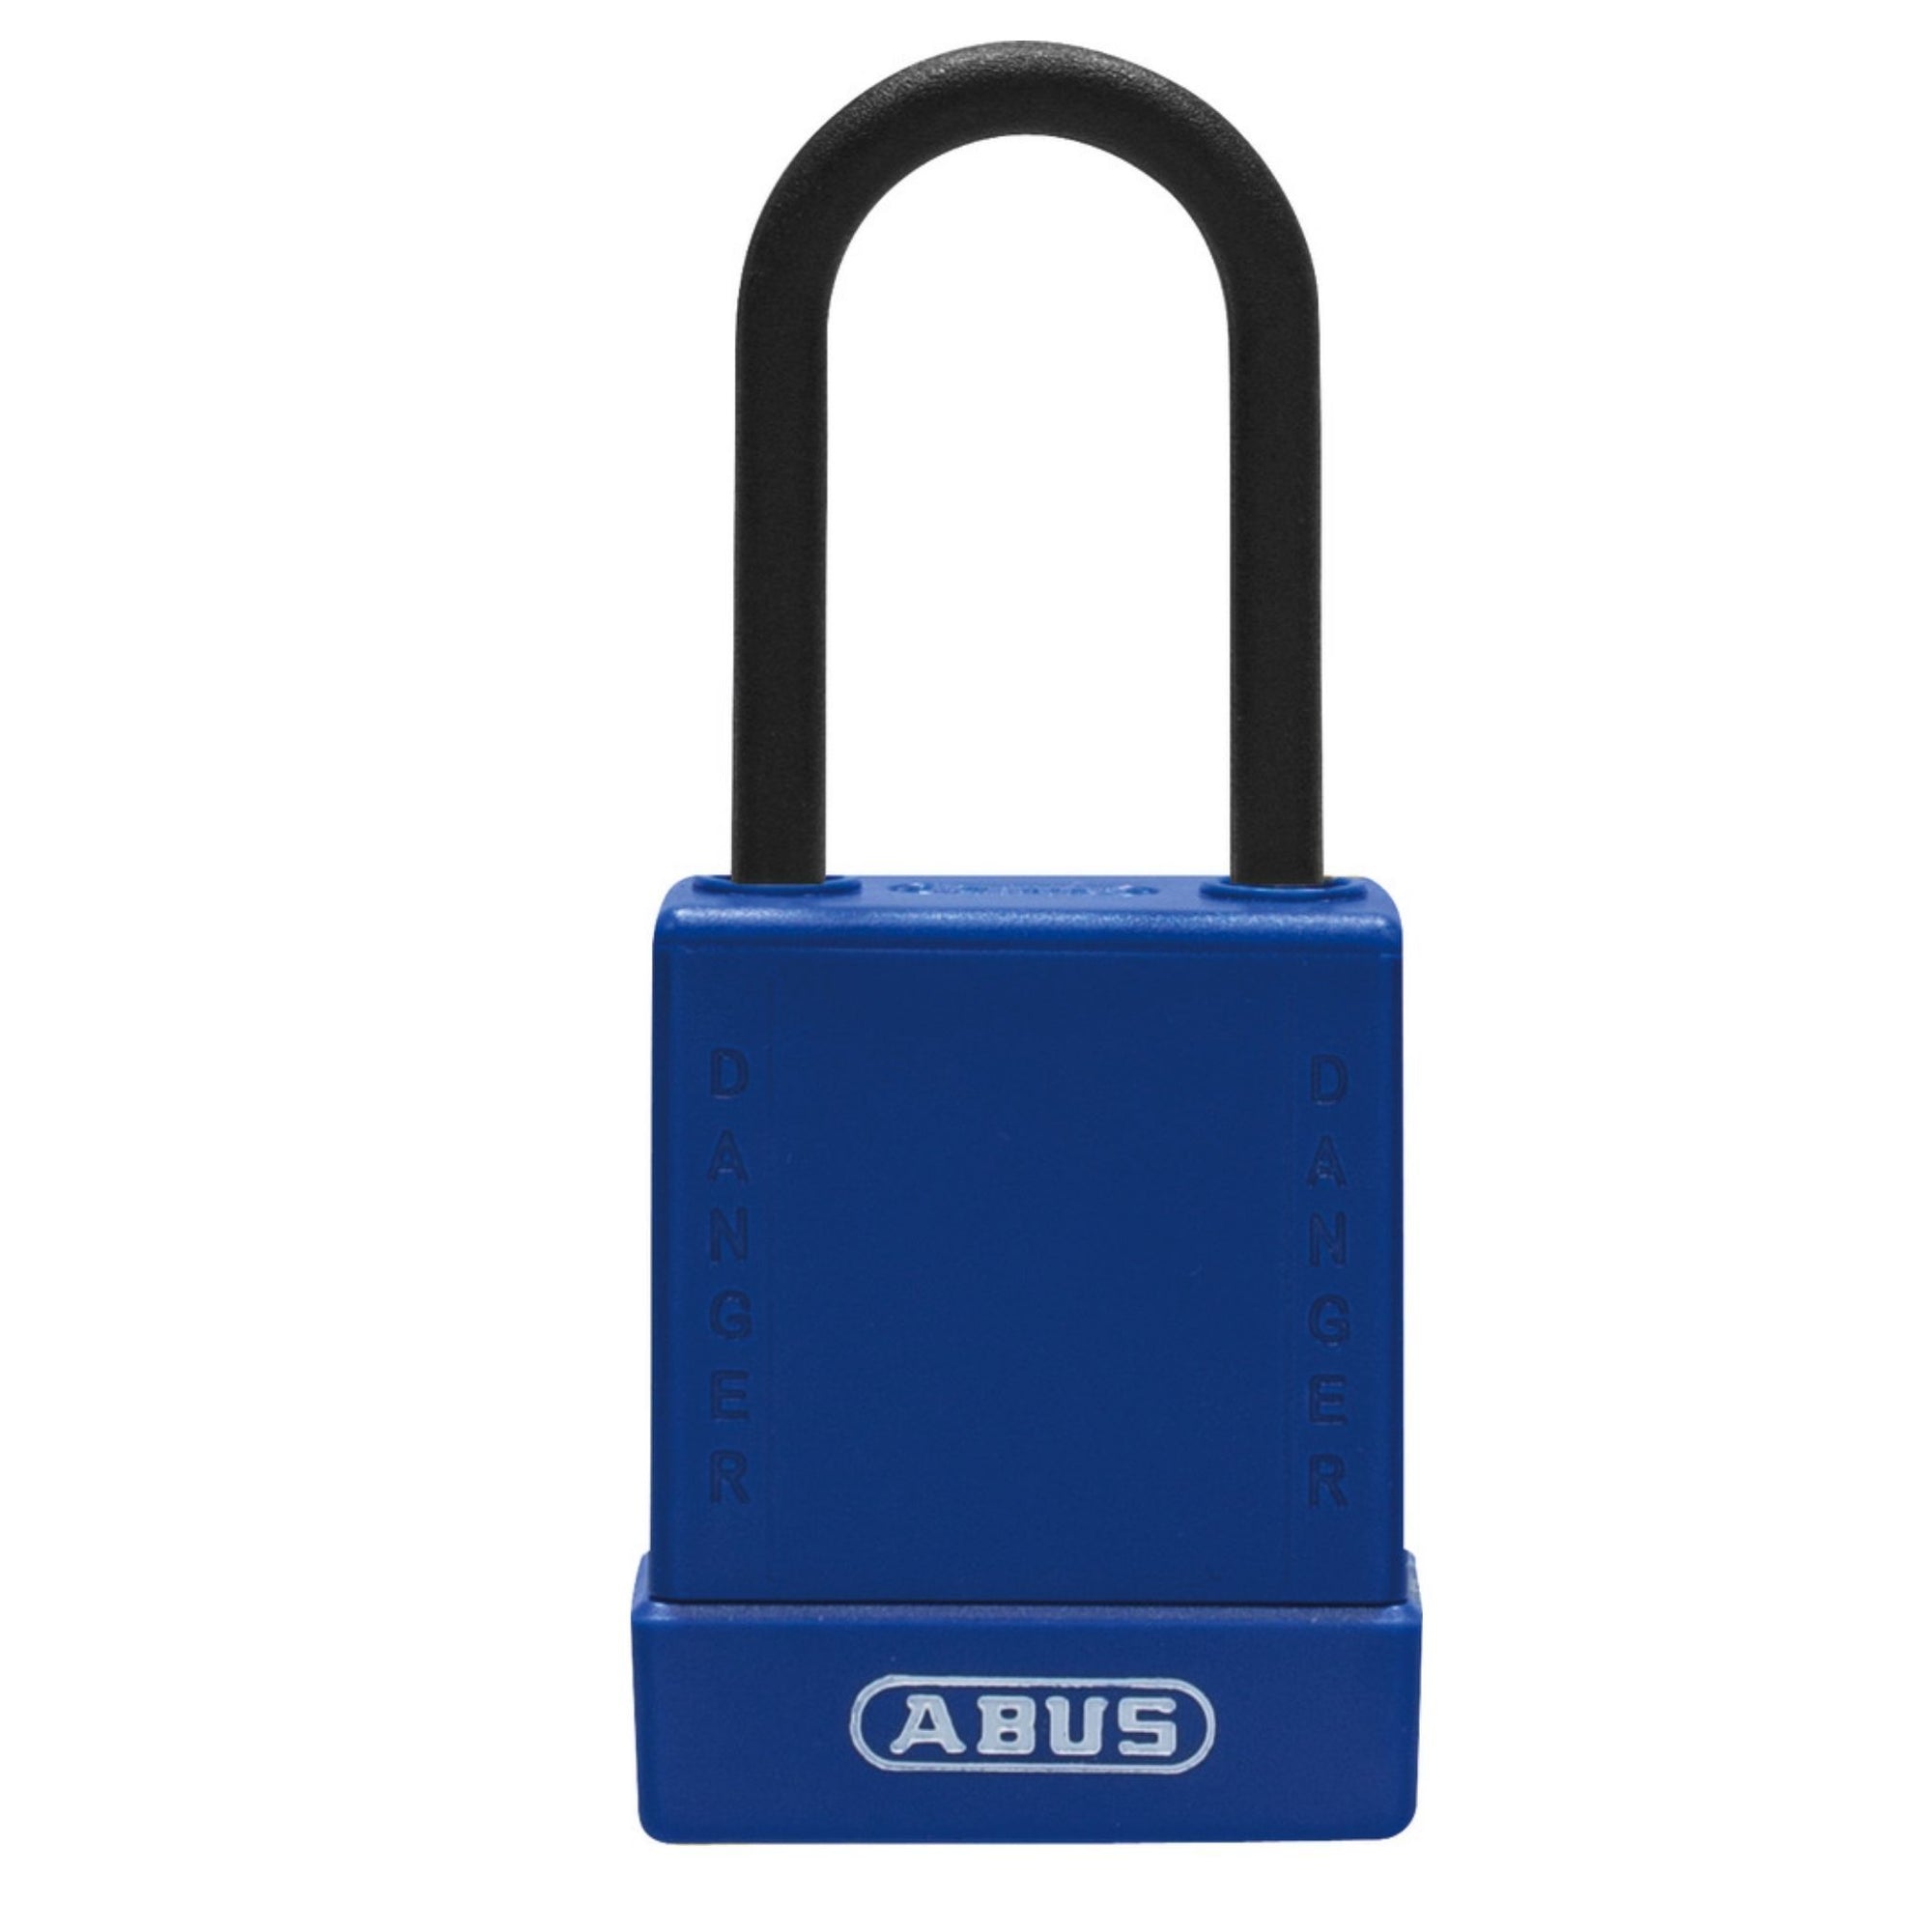 Abus 76PS/40 Blue Safety Locks with 1-1/2" Steel Shackle Covered by Plastic Sleeve - The Lock Source